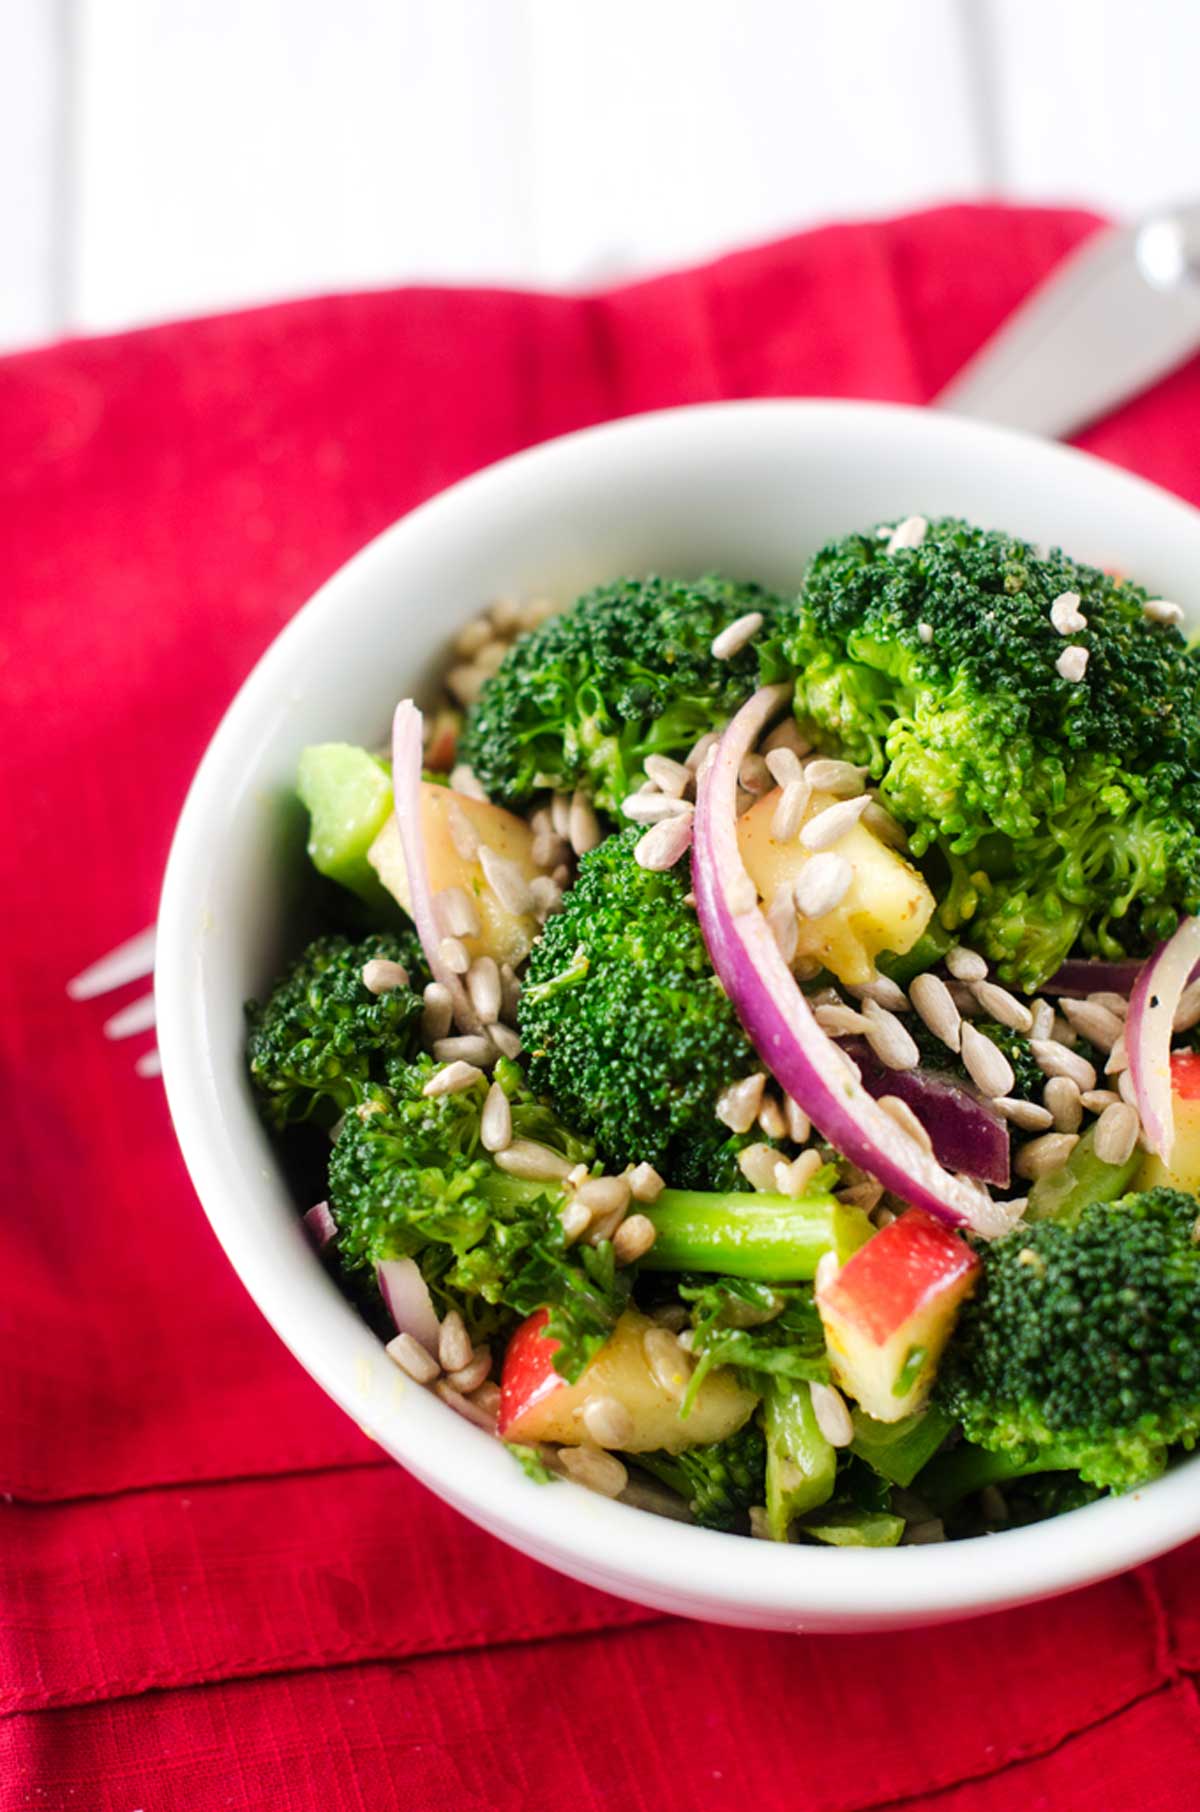 Photo of a white bowl of apple broccoli salad sitting on a red napkin.